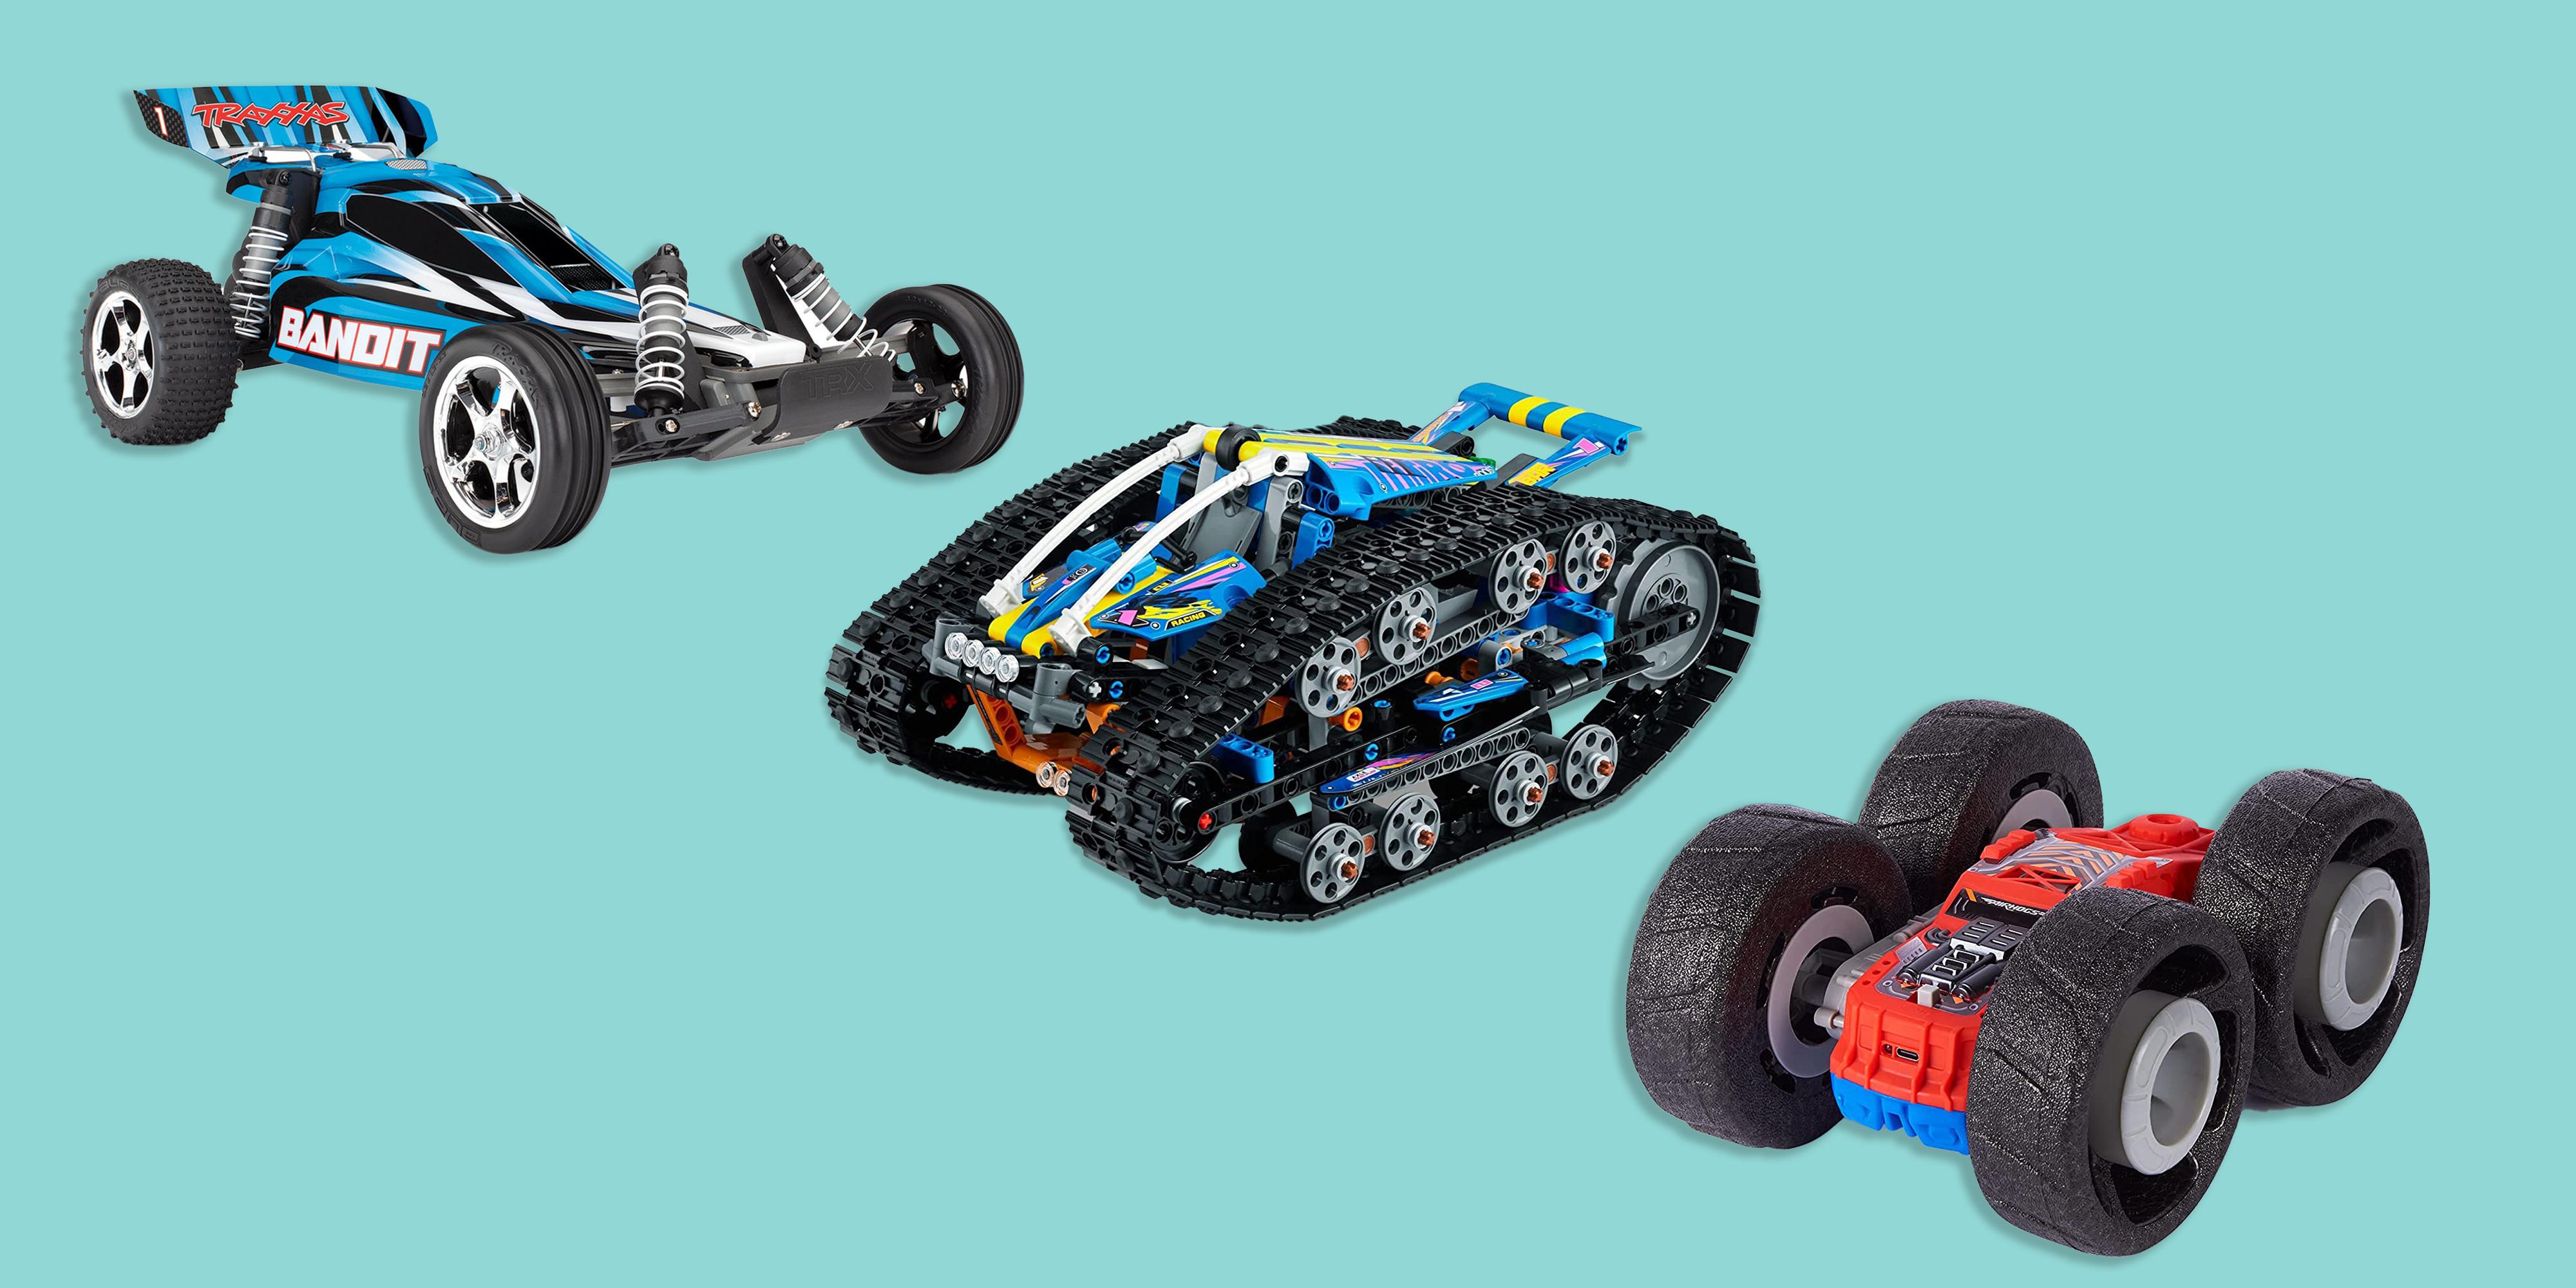 Rc Cars For Sale: Choosing the Right RC Car for Your Adventures